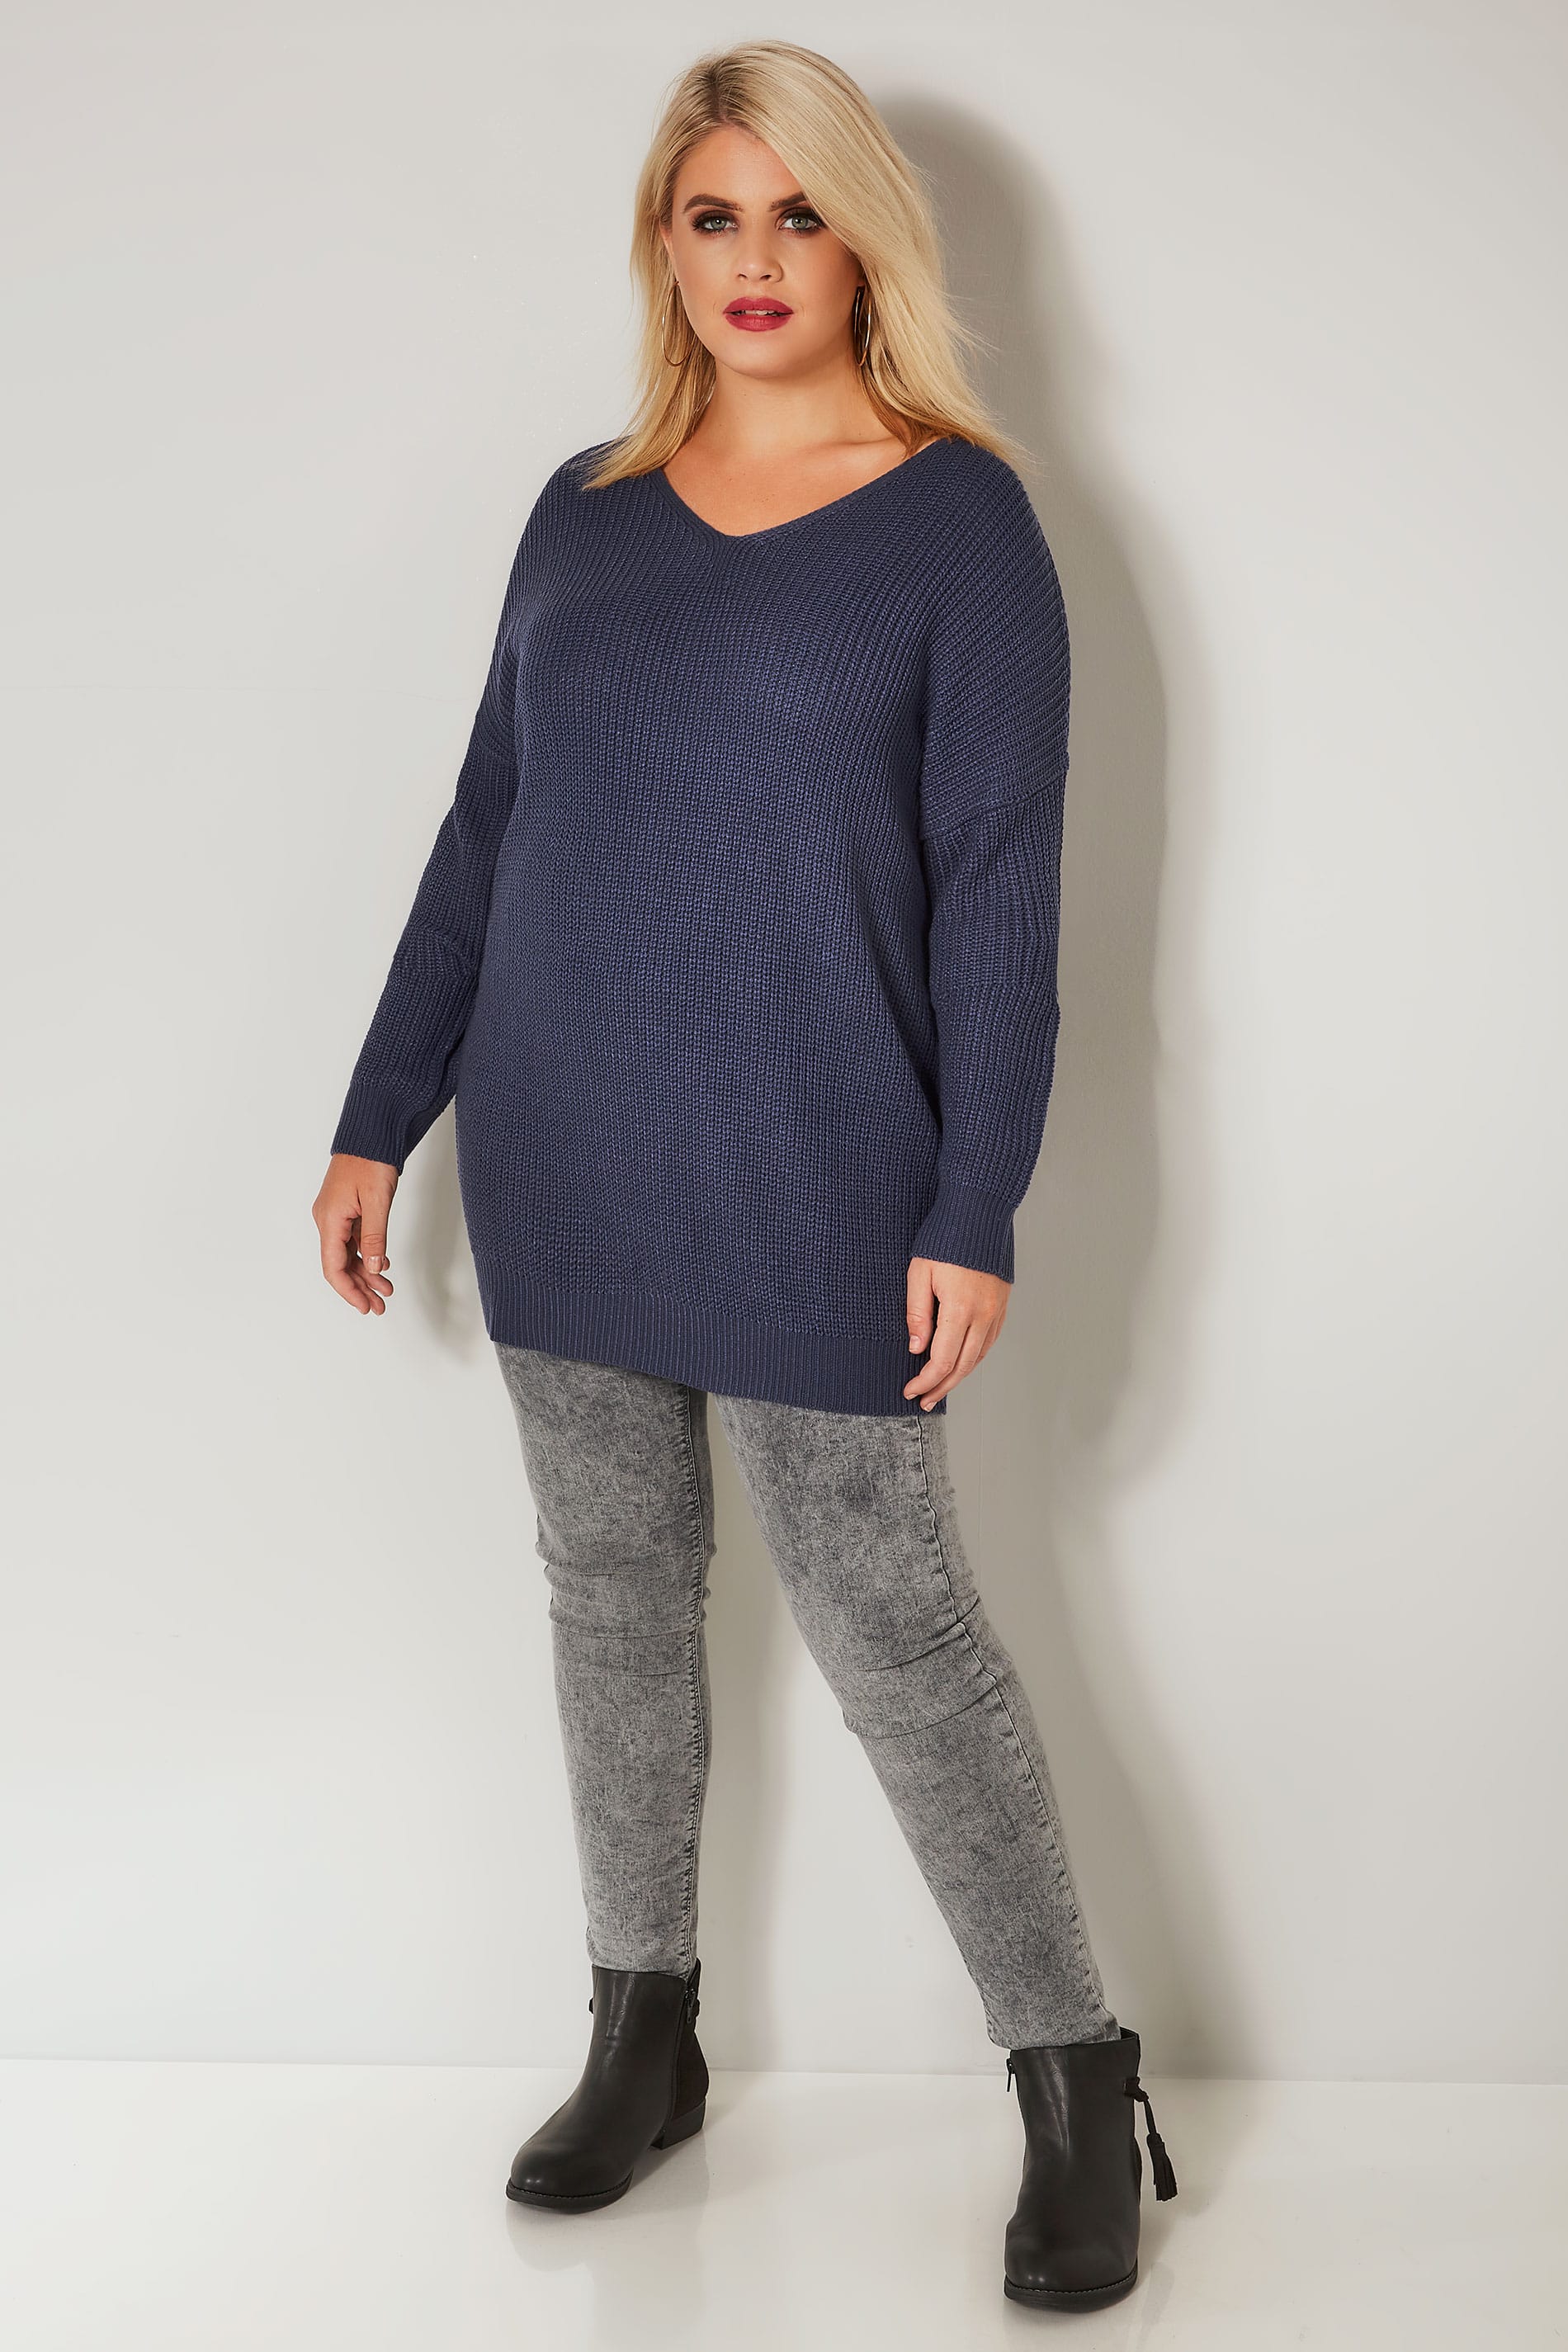 Blue Knitted Jumper With Cross Over Straps, plus size 16 to 36